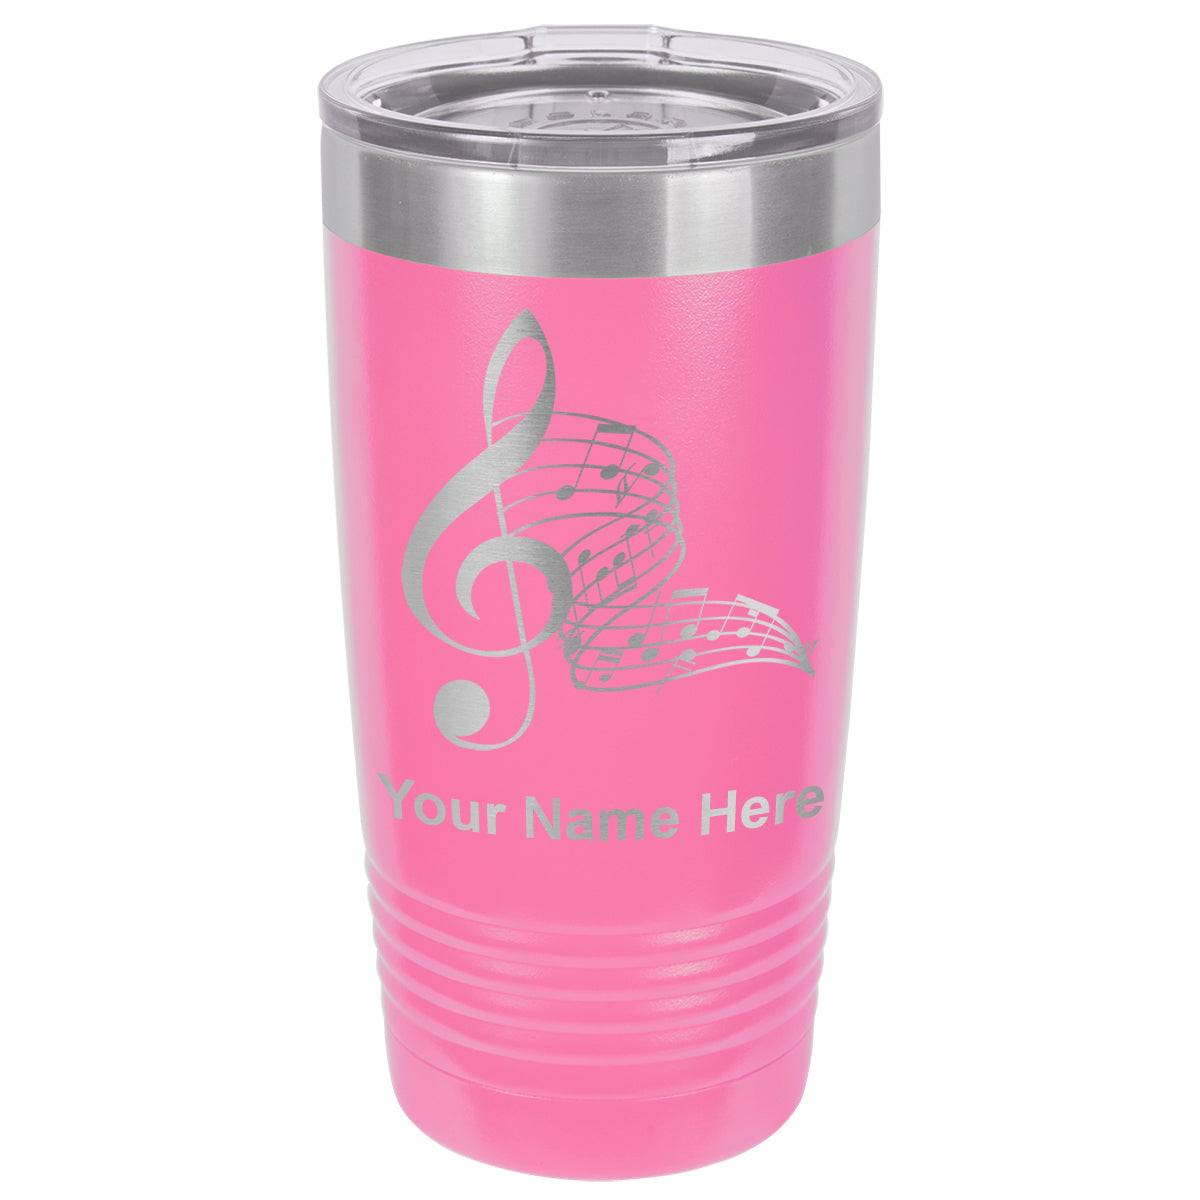 20oz Vacuum Insulated Tumbler Mug, Musical Notes, Personalized Engraving Included